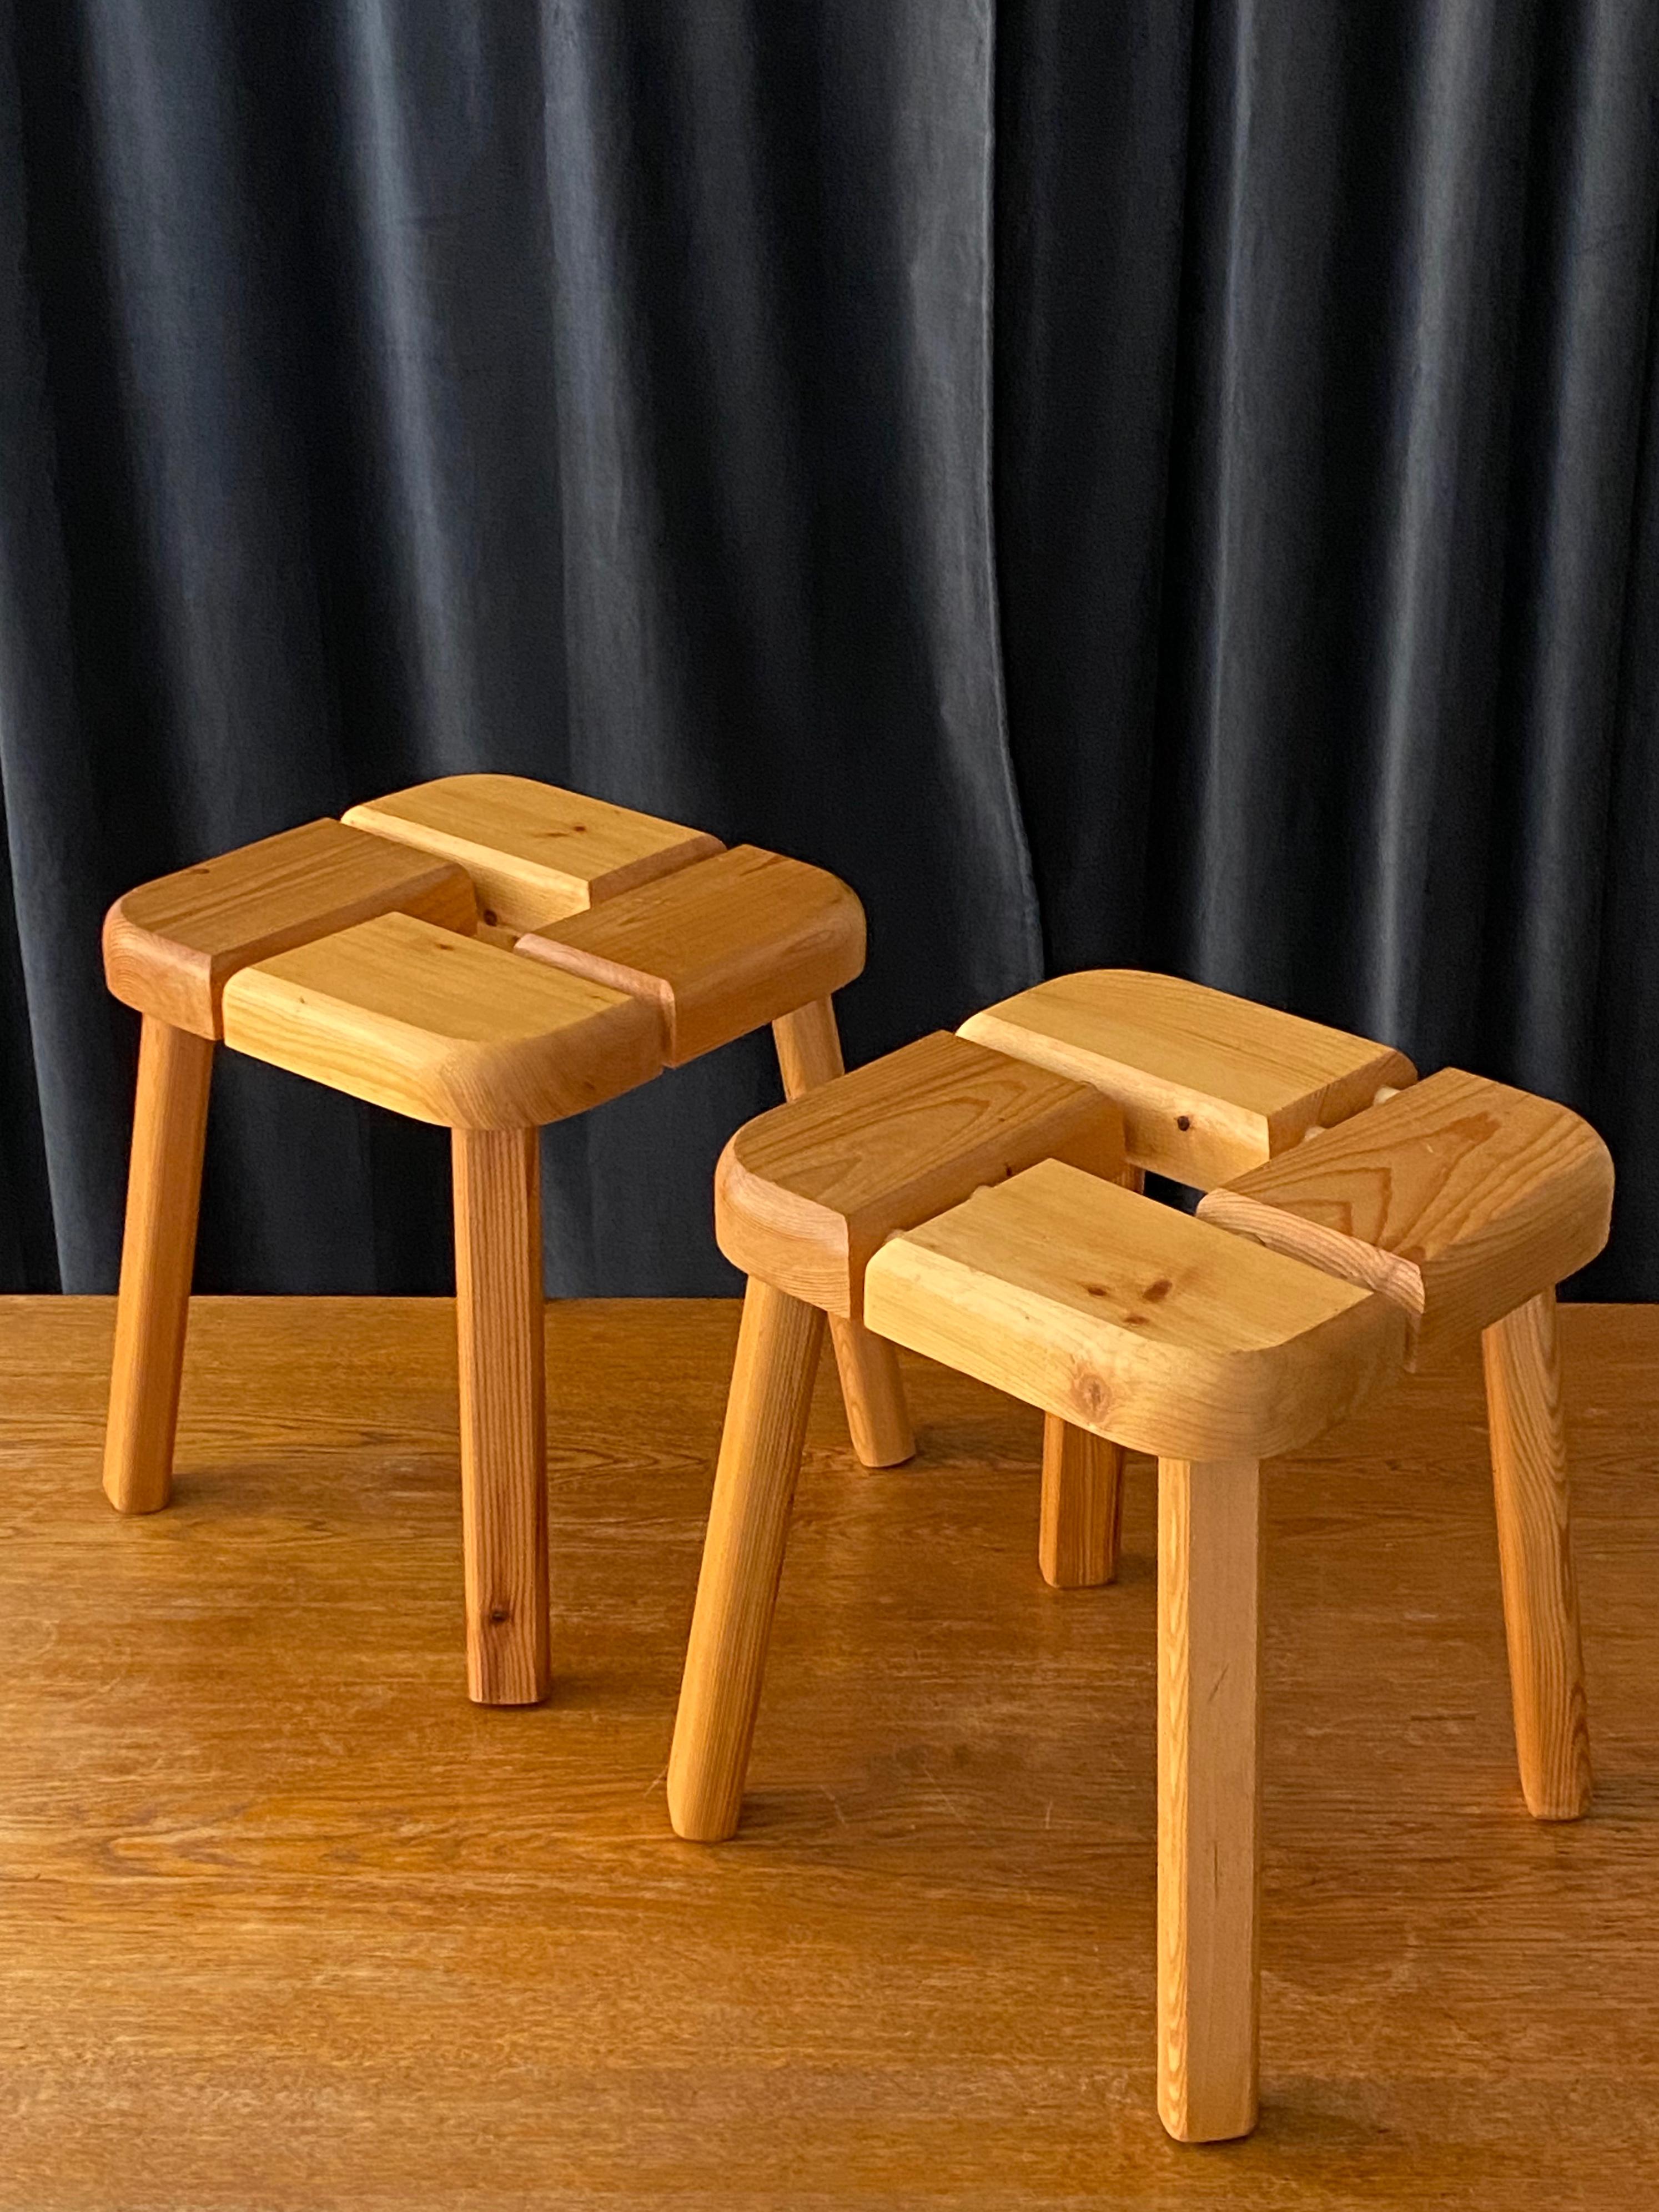 A pair of stools in sculpted and joined solid pine, features beautiful revealed joinery. Design attributed to Olof Ottelin, produced in Finland, 1960s.

Other designers of the period include Lisa Johansson-Pape, Axel Einar Hjorth, Pierre Chapo,